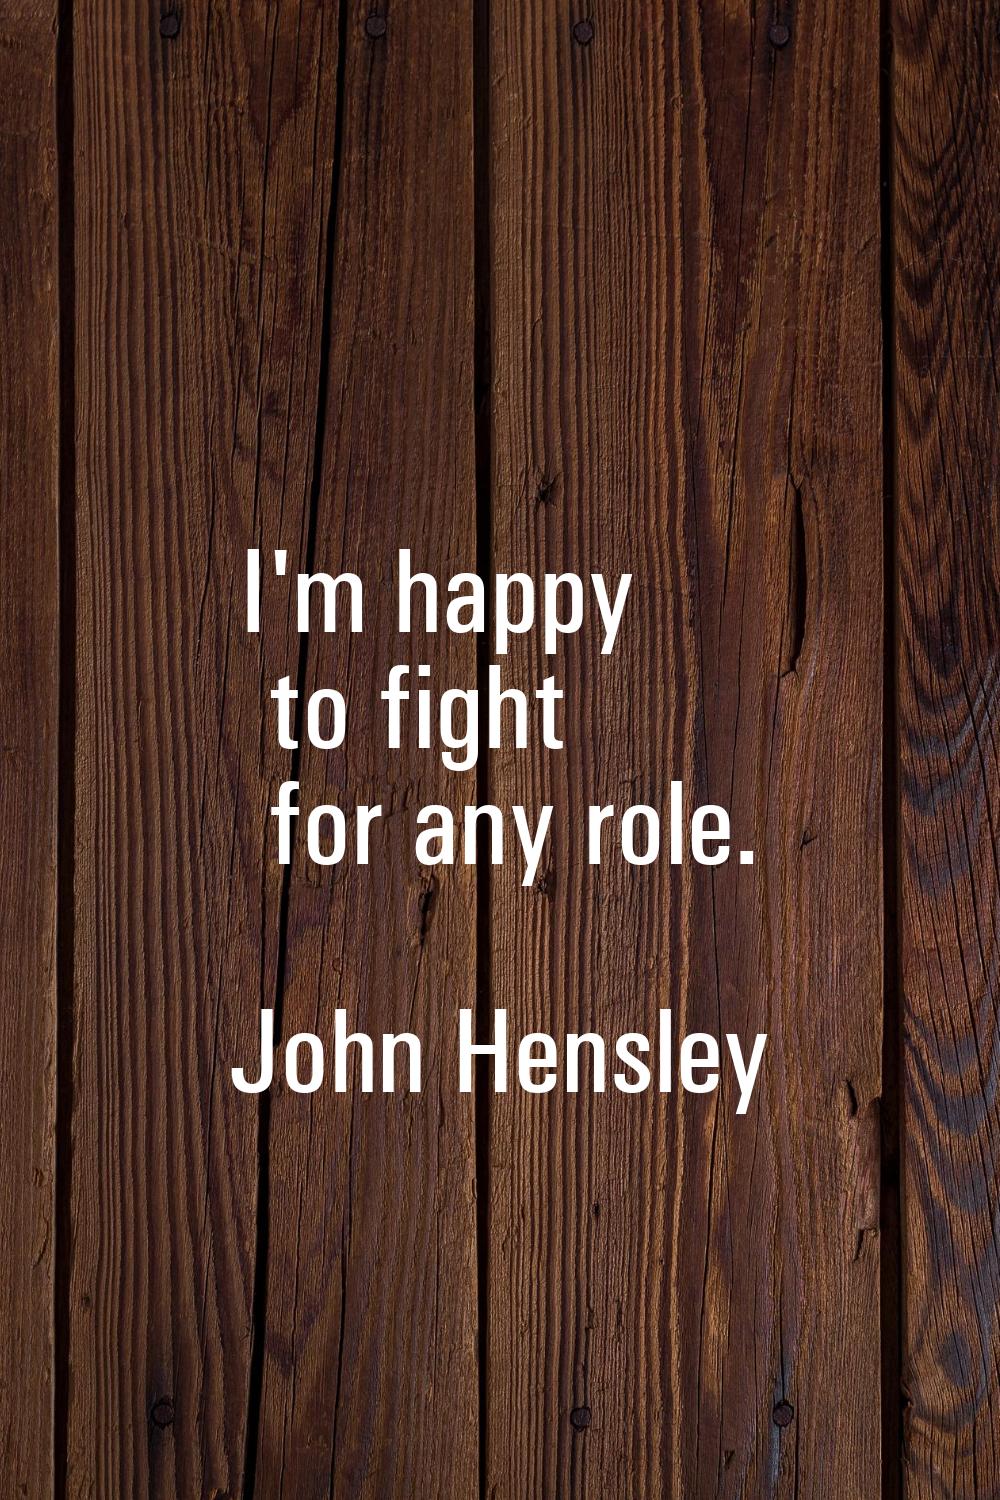 I'm happy to fight for any role.